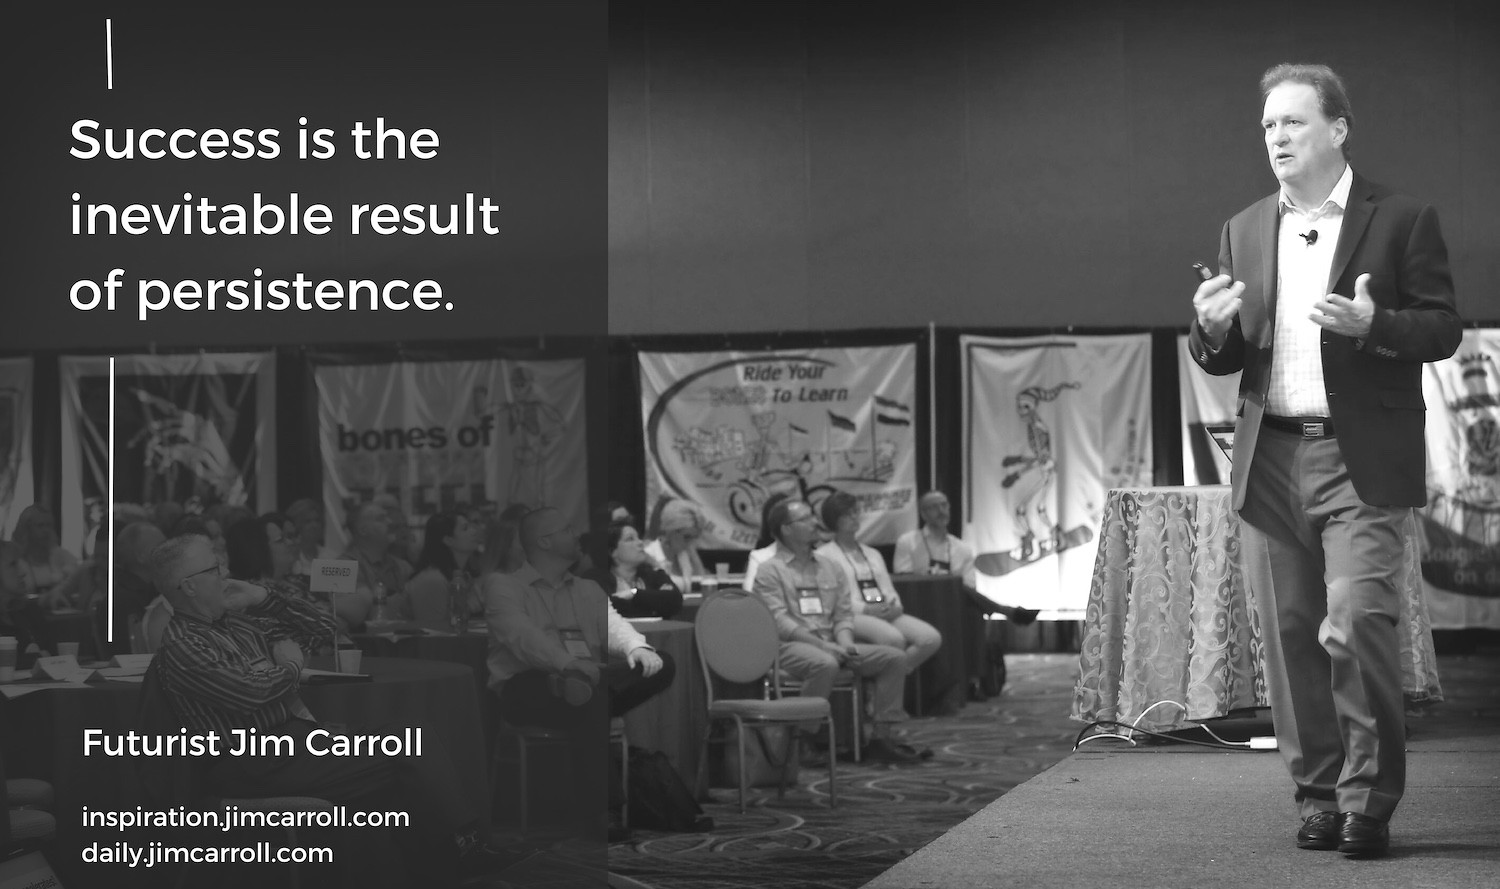 "Success is the inevitable result of persistence" - Futurist Jim Carroll